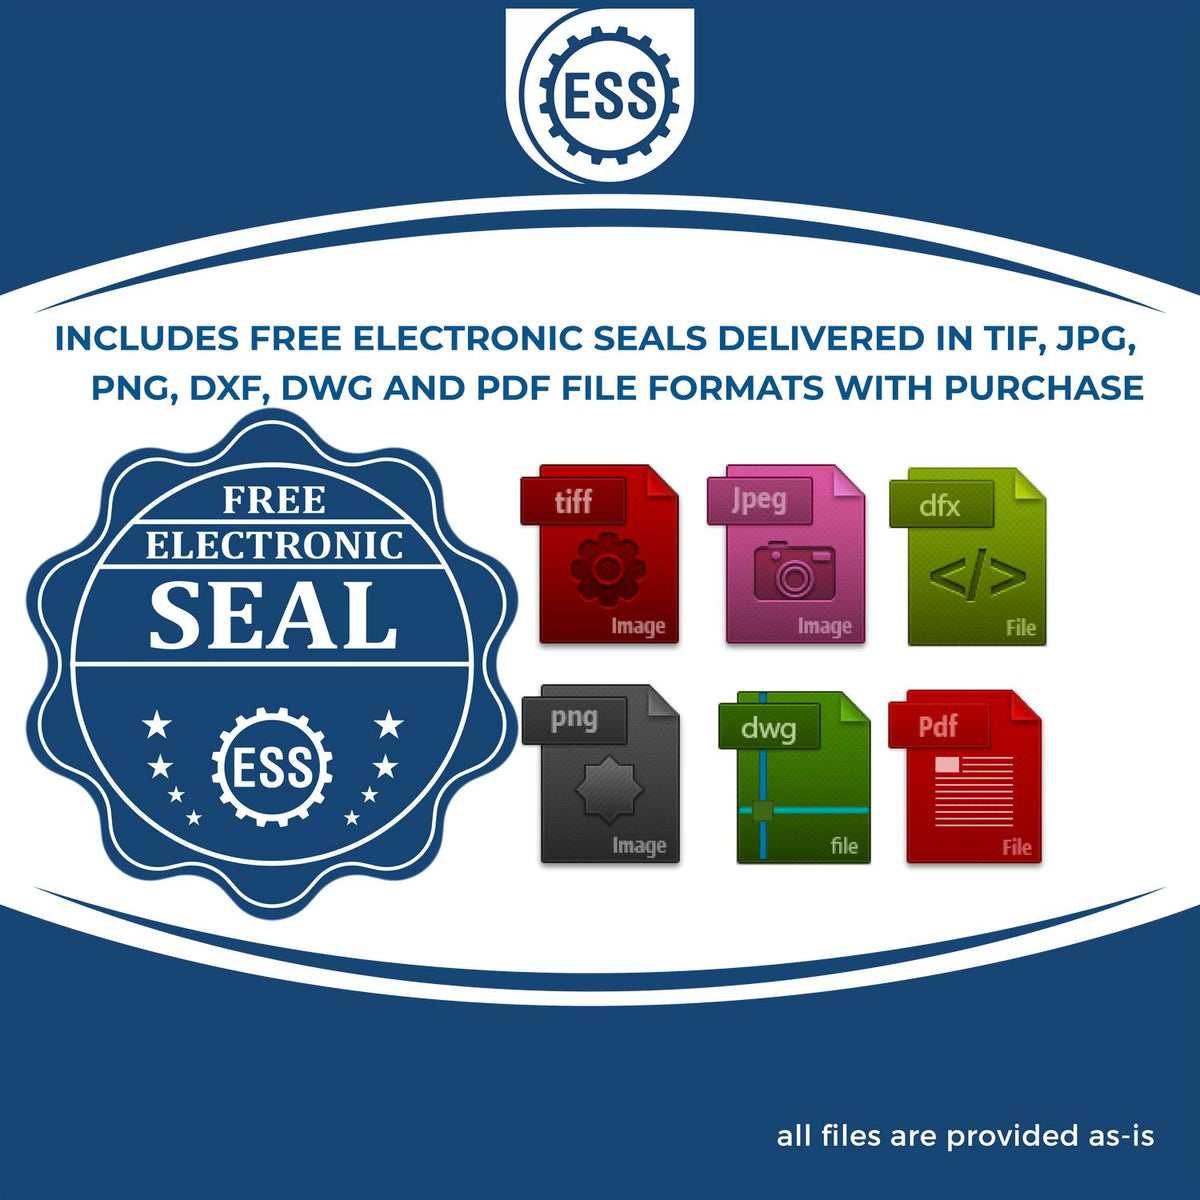 An infographic for the free electronic seal for the Gift Iowa Engineer Seal illustrating the different file type icons such as DXF, DWG, TIF, JPG and PNG.